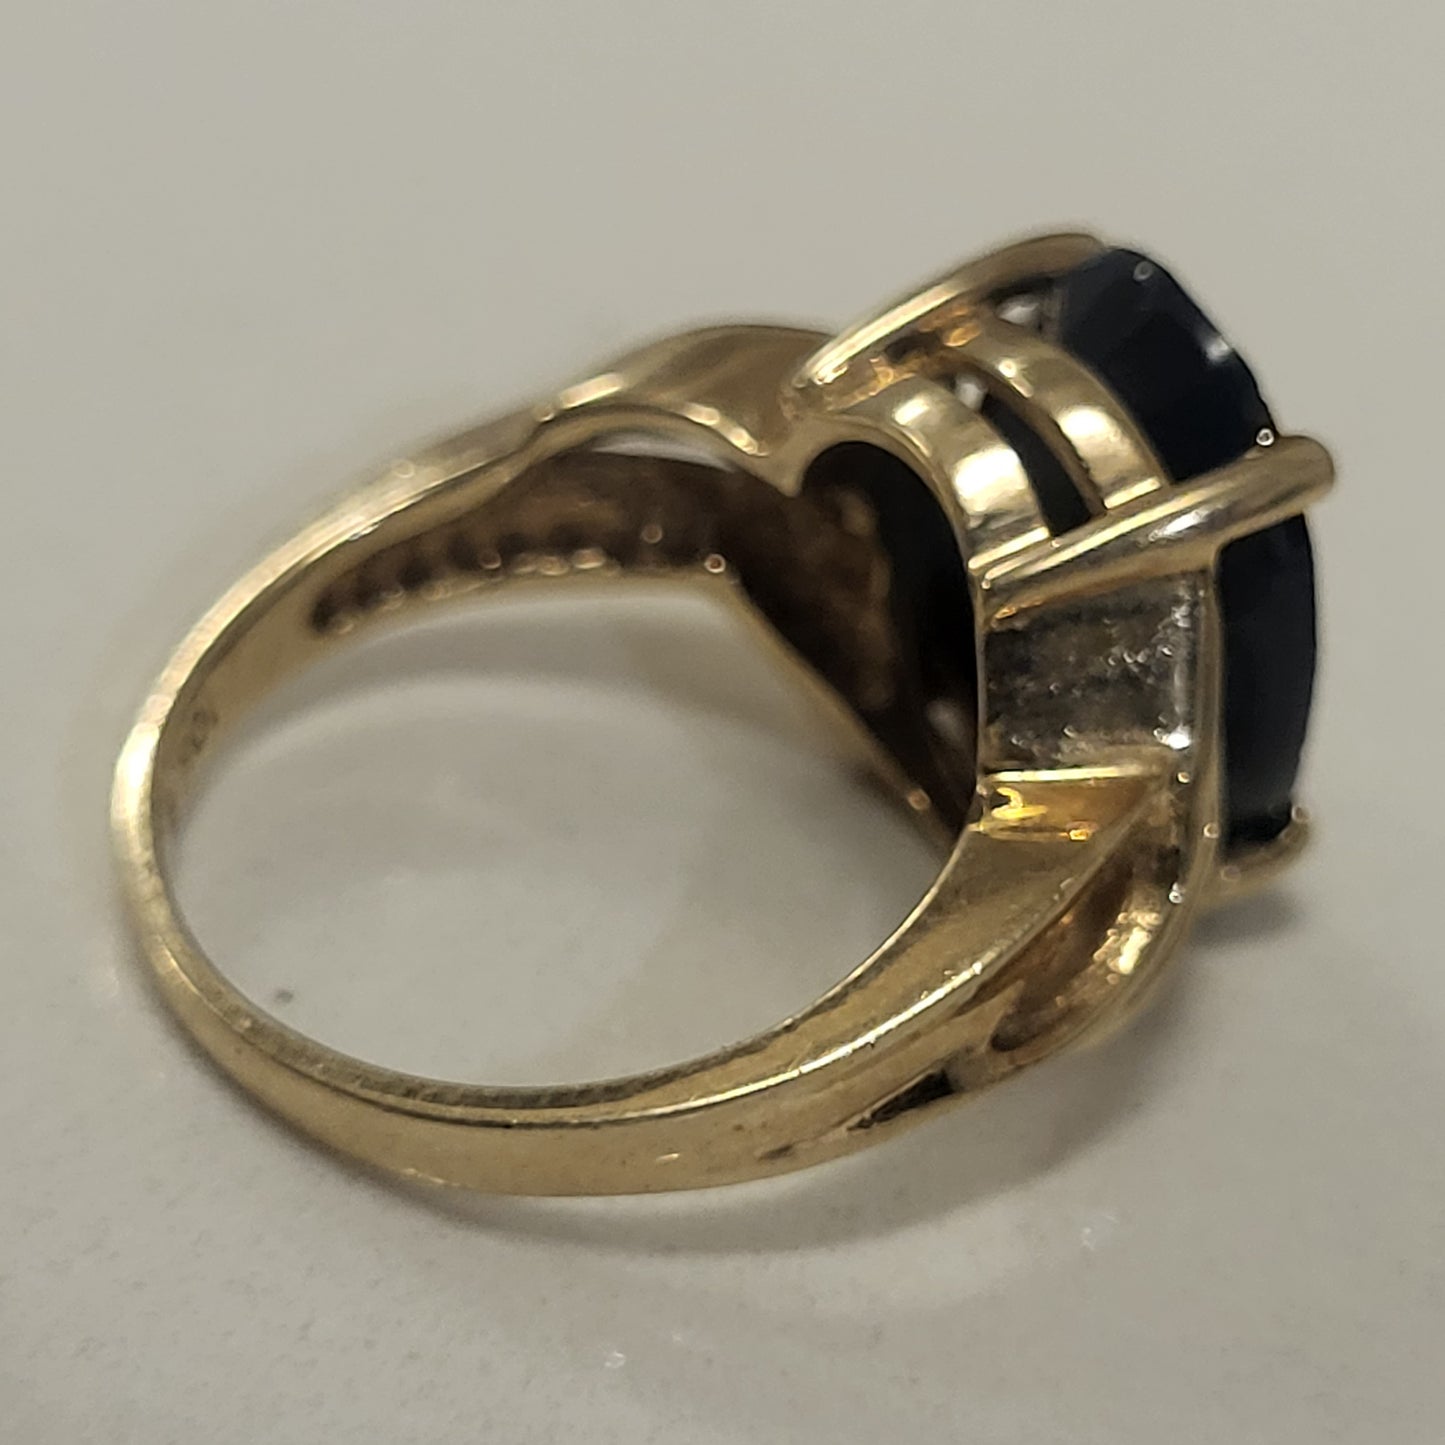 10K Yellow Gold Ring with Sapphire and Diamond Gemstones